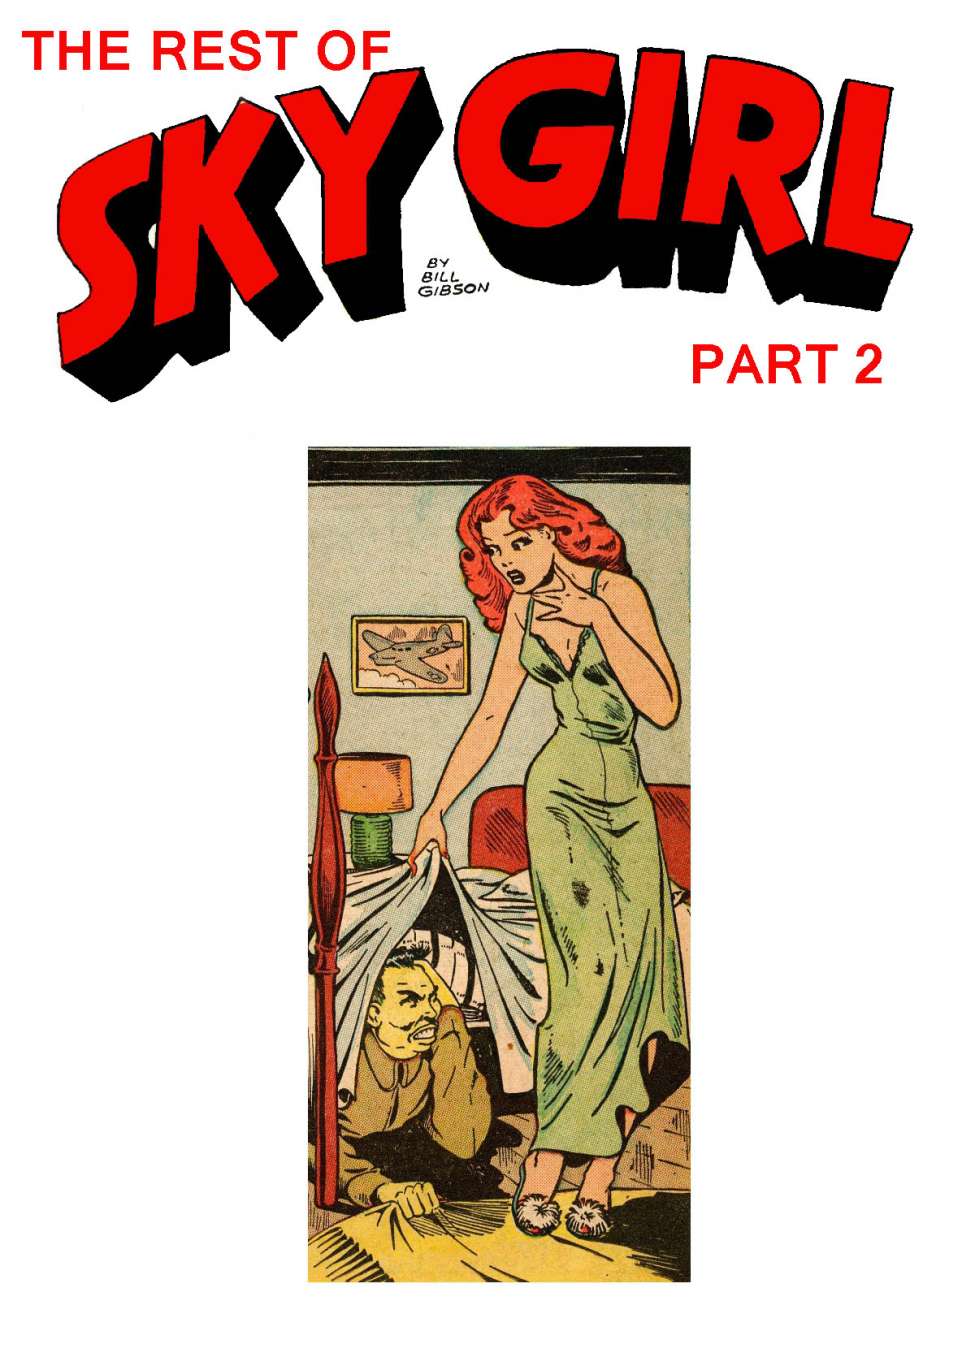 Comic Book Cover For Sky Girl Collection, The Rest of Part 2